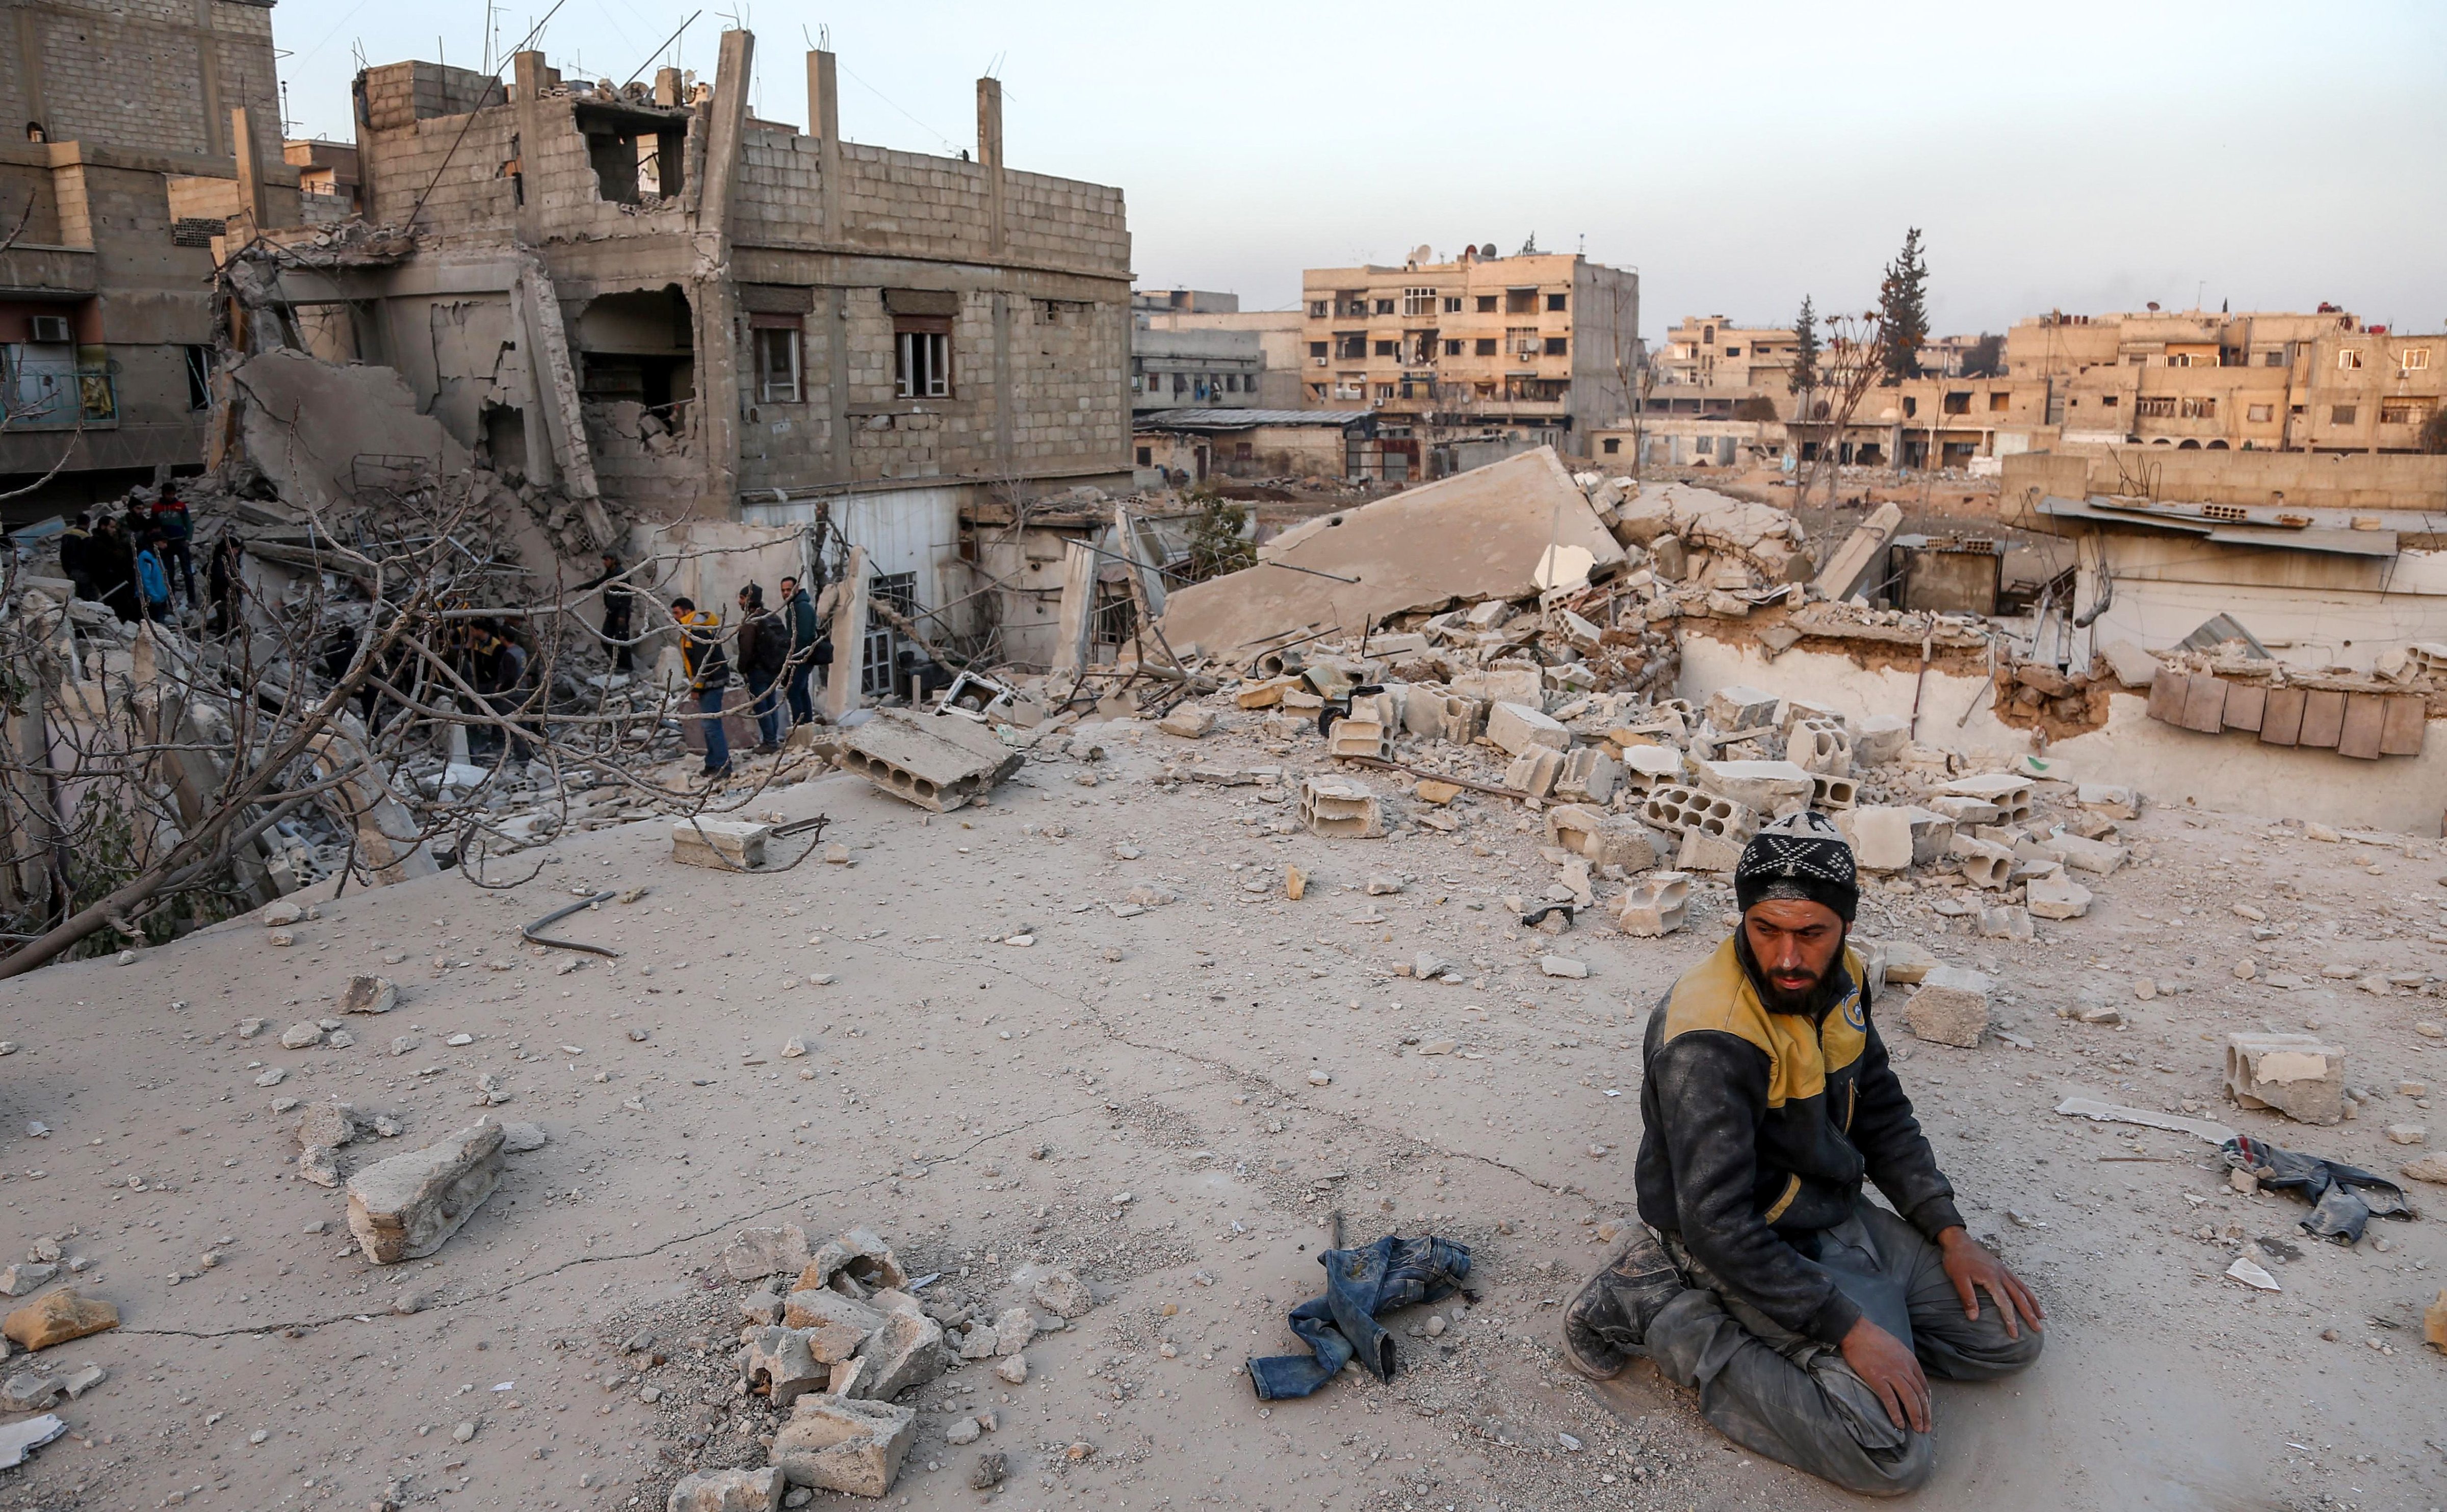 A Syrian civil defense volunteer performs ritual sunset prayers next to the site of a building that collapsed following reported regime air strikes in the rebel-held town of Arbin, in the besieged Eastern Ghouta region on the outskirts of the capital Damascus, on February 6, 2018. (ABDULMONAM EASSA&mdash;AFP/Getty Images)